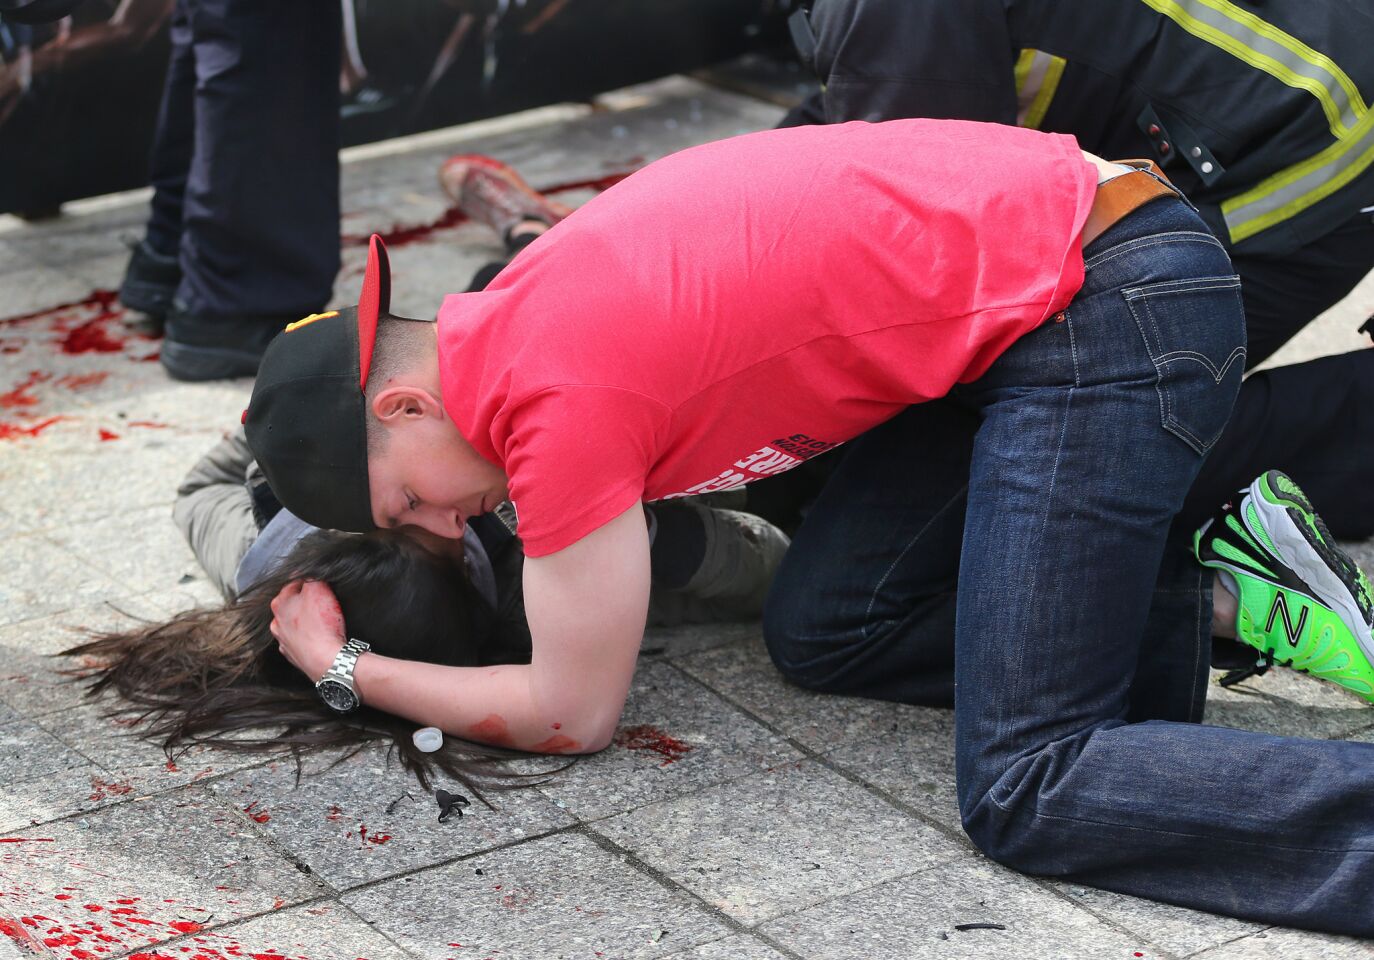 A man comforts an injured woman on the sidewalk after the first explosion.